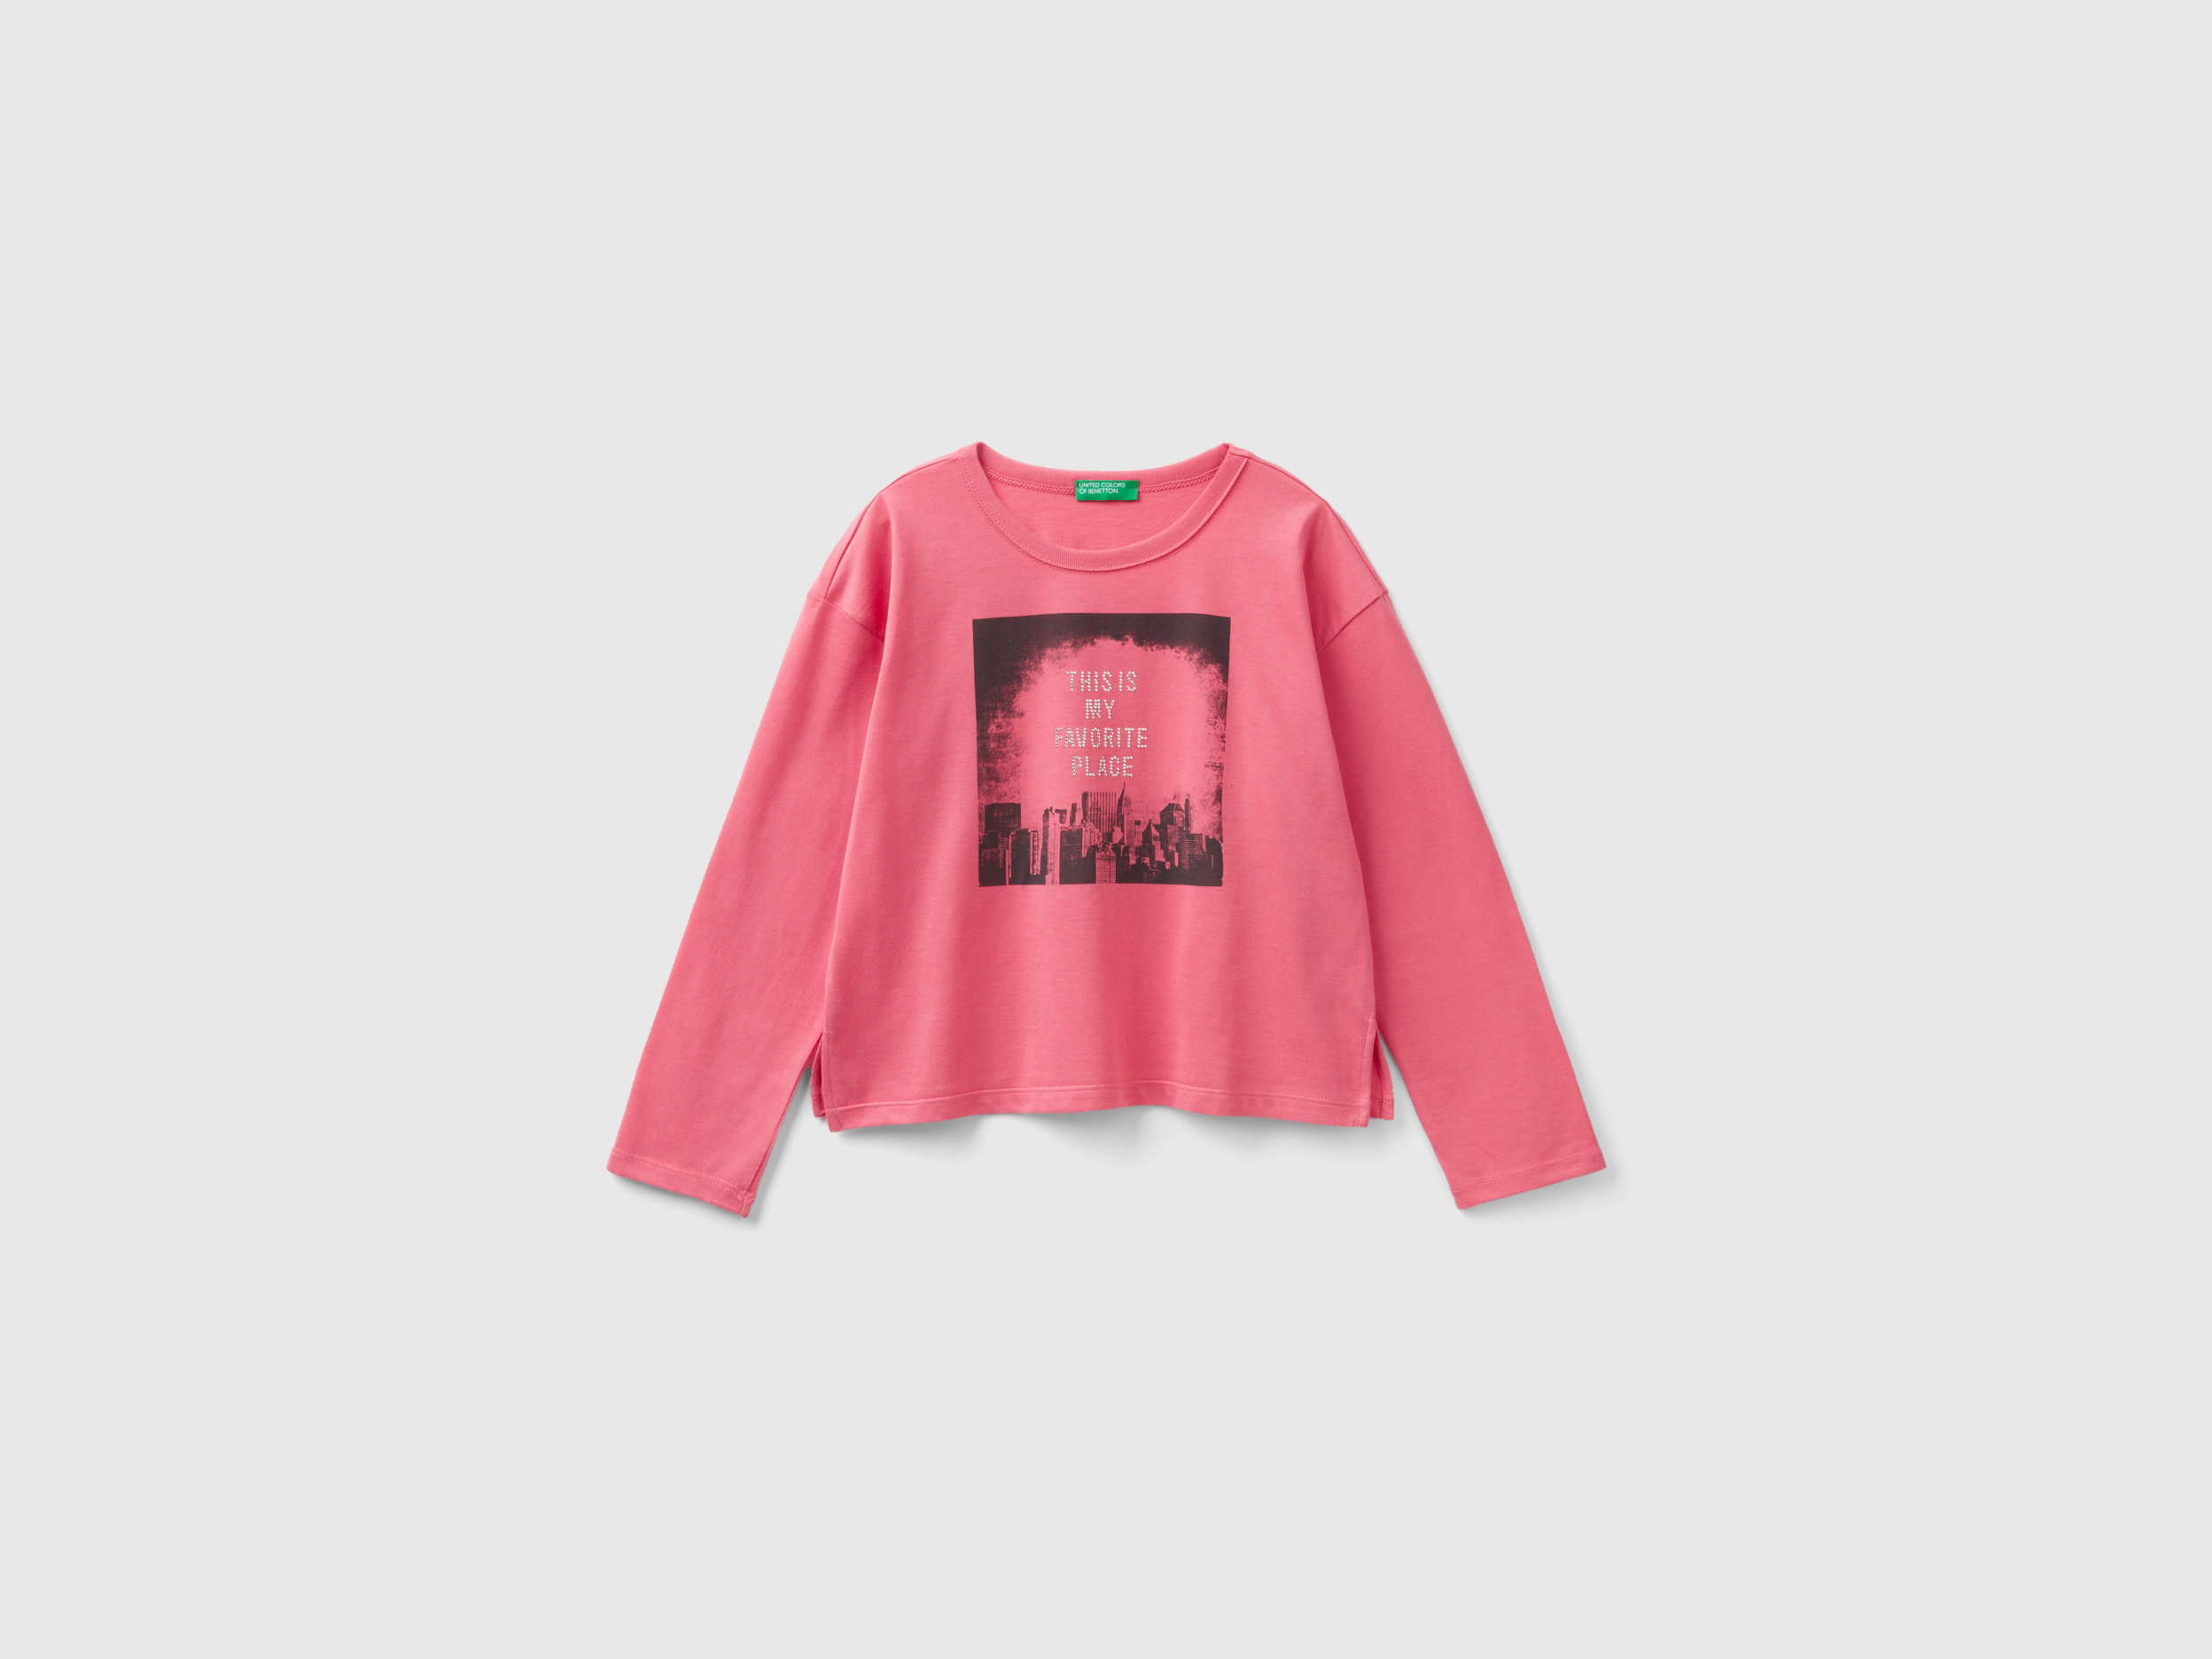 Benetton, T-shirt With Print And Studs, size 3XL, Pink, Kids